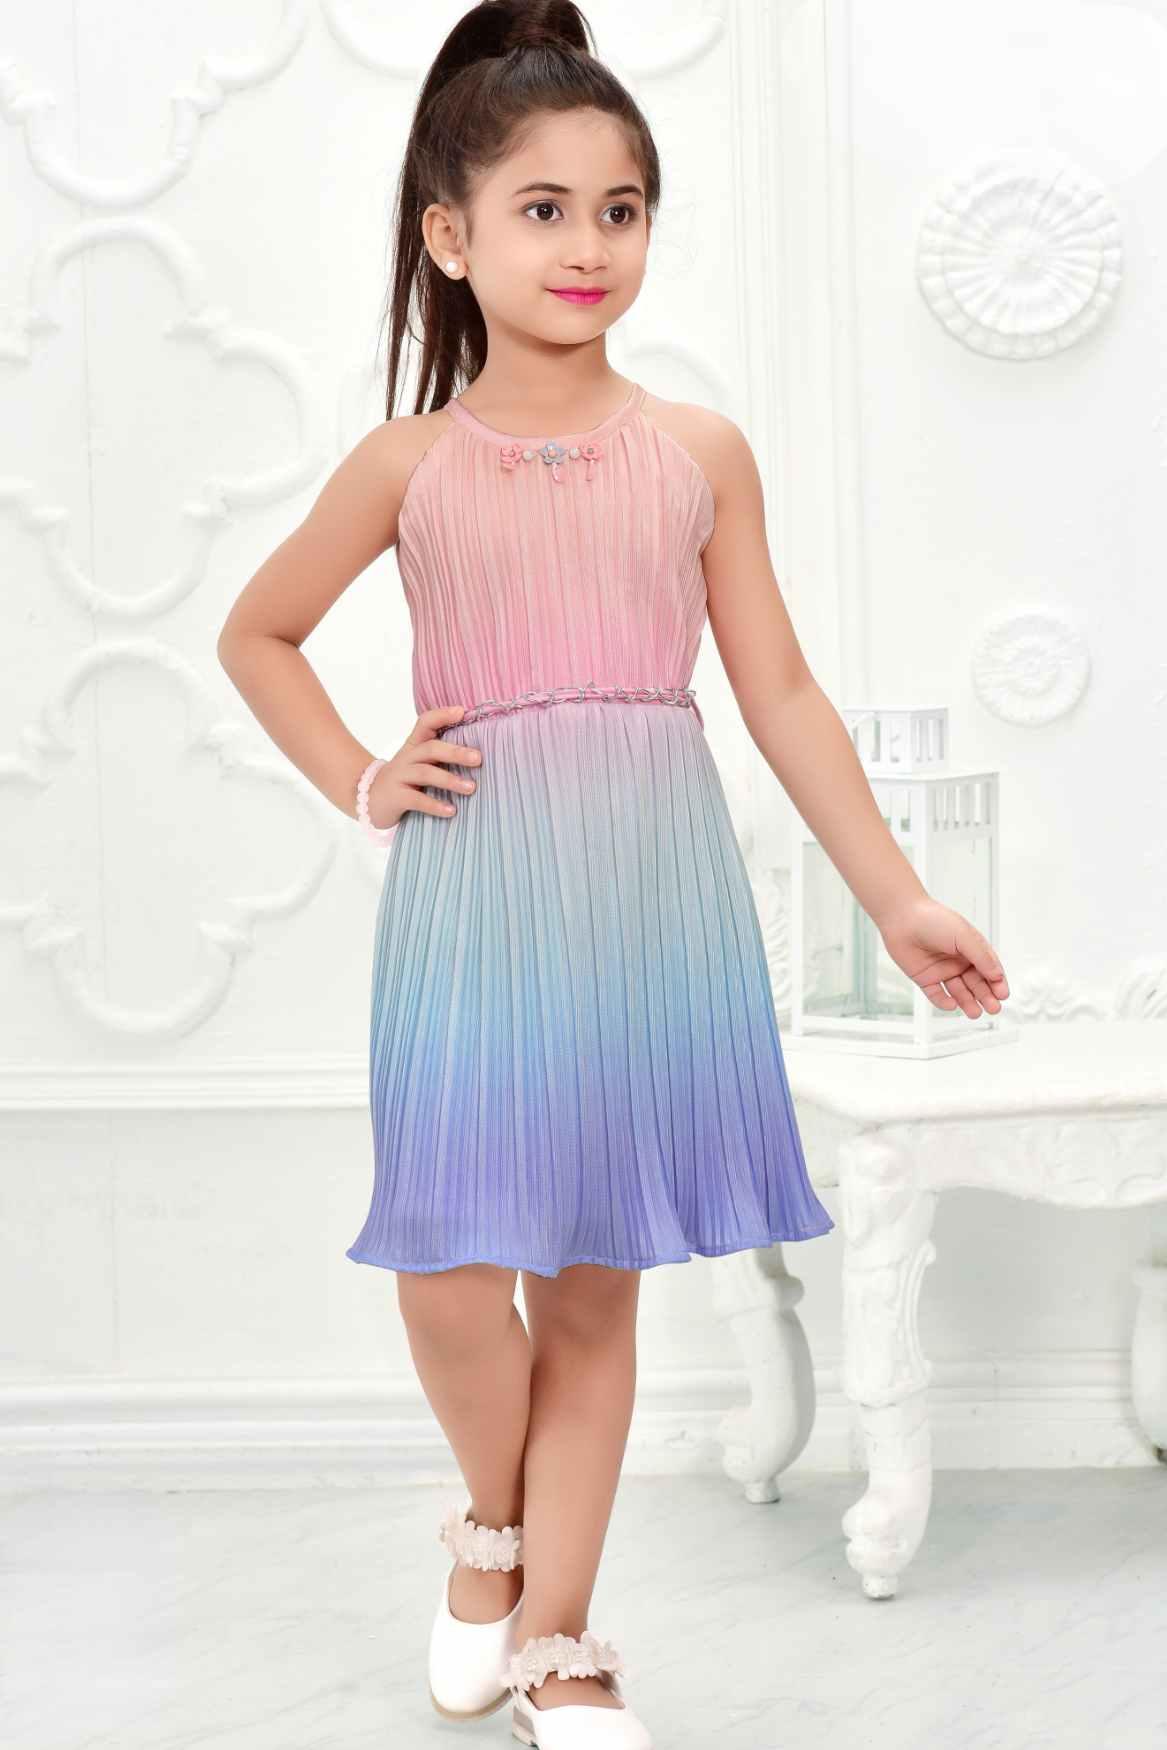 Stylish Pink And Blue Party Wear Dress For Girls - Lagorii Kids